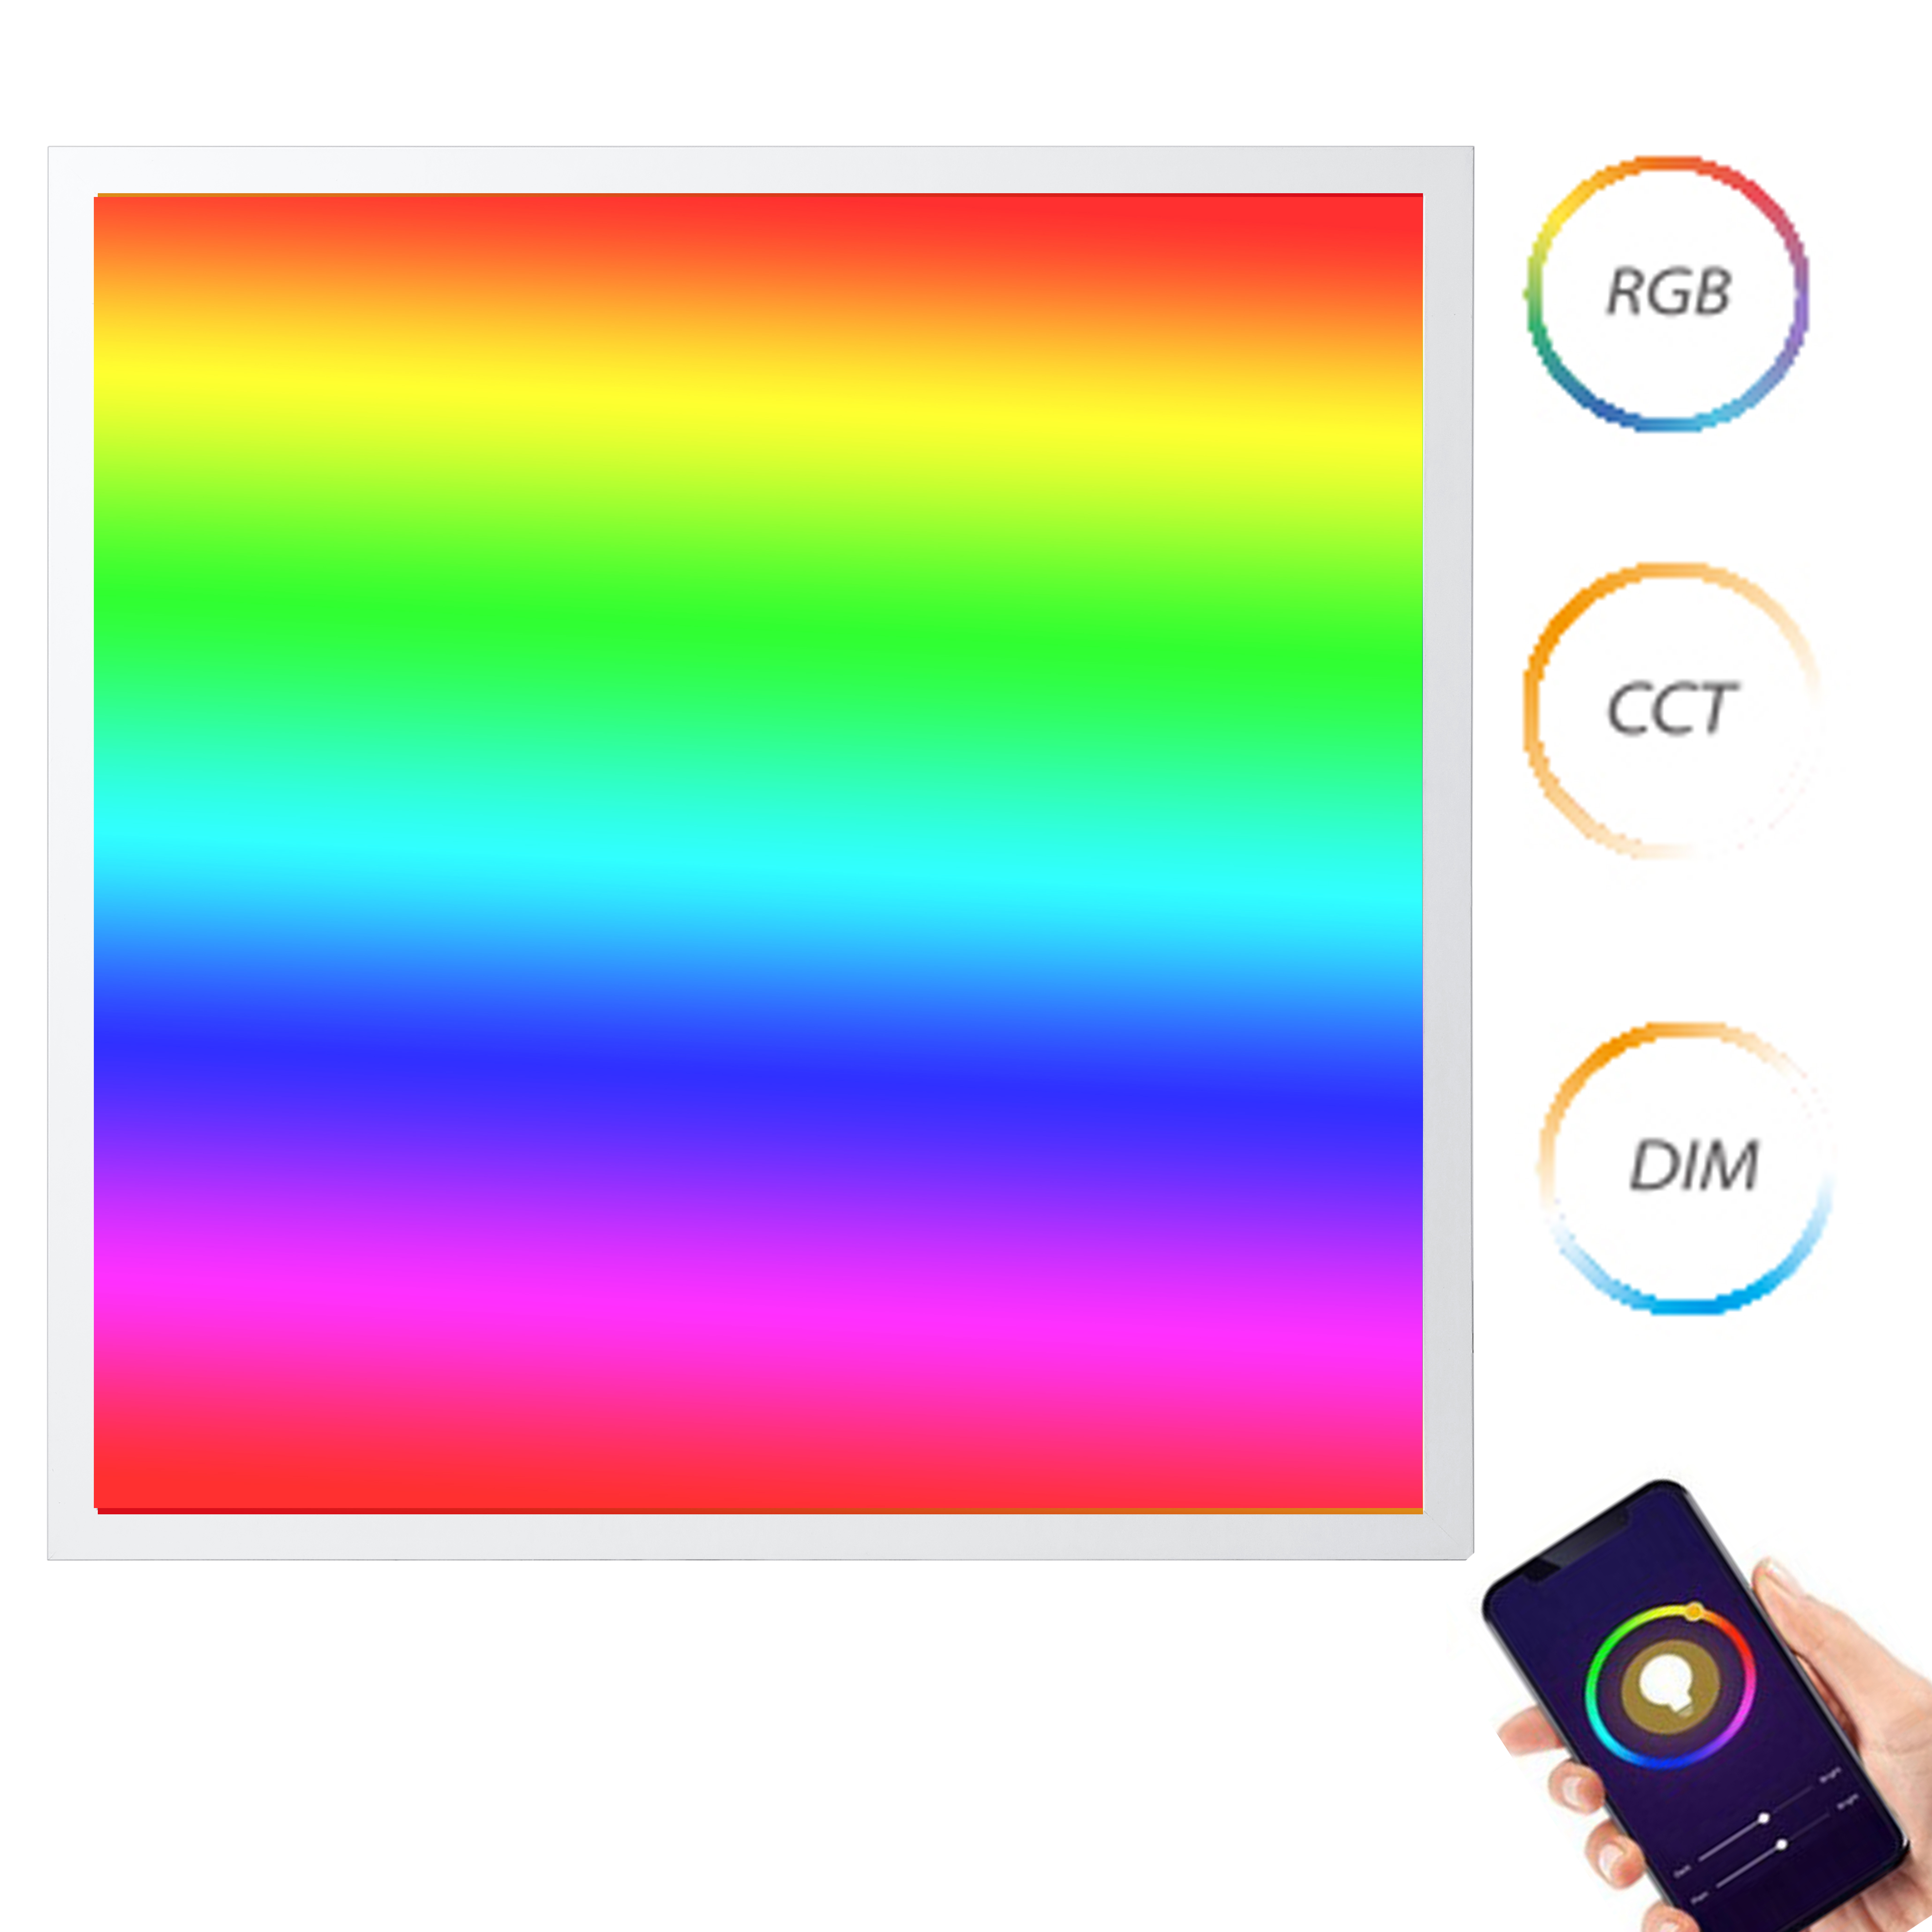 Wifi Remote Control Dimmable Smart RGB CCT RGBW RGBCW Led Ceiling Panel Light